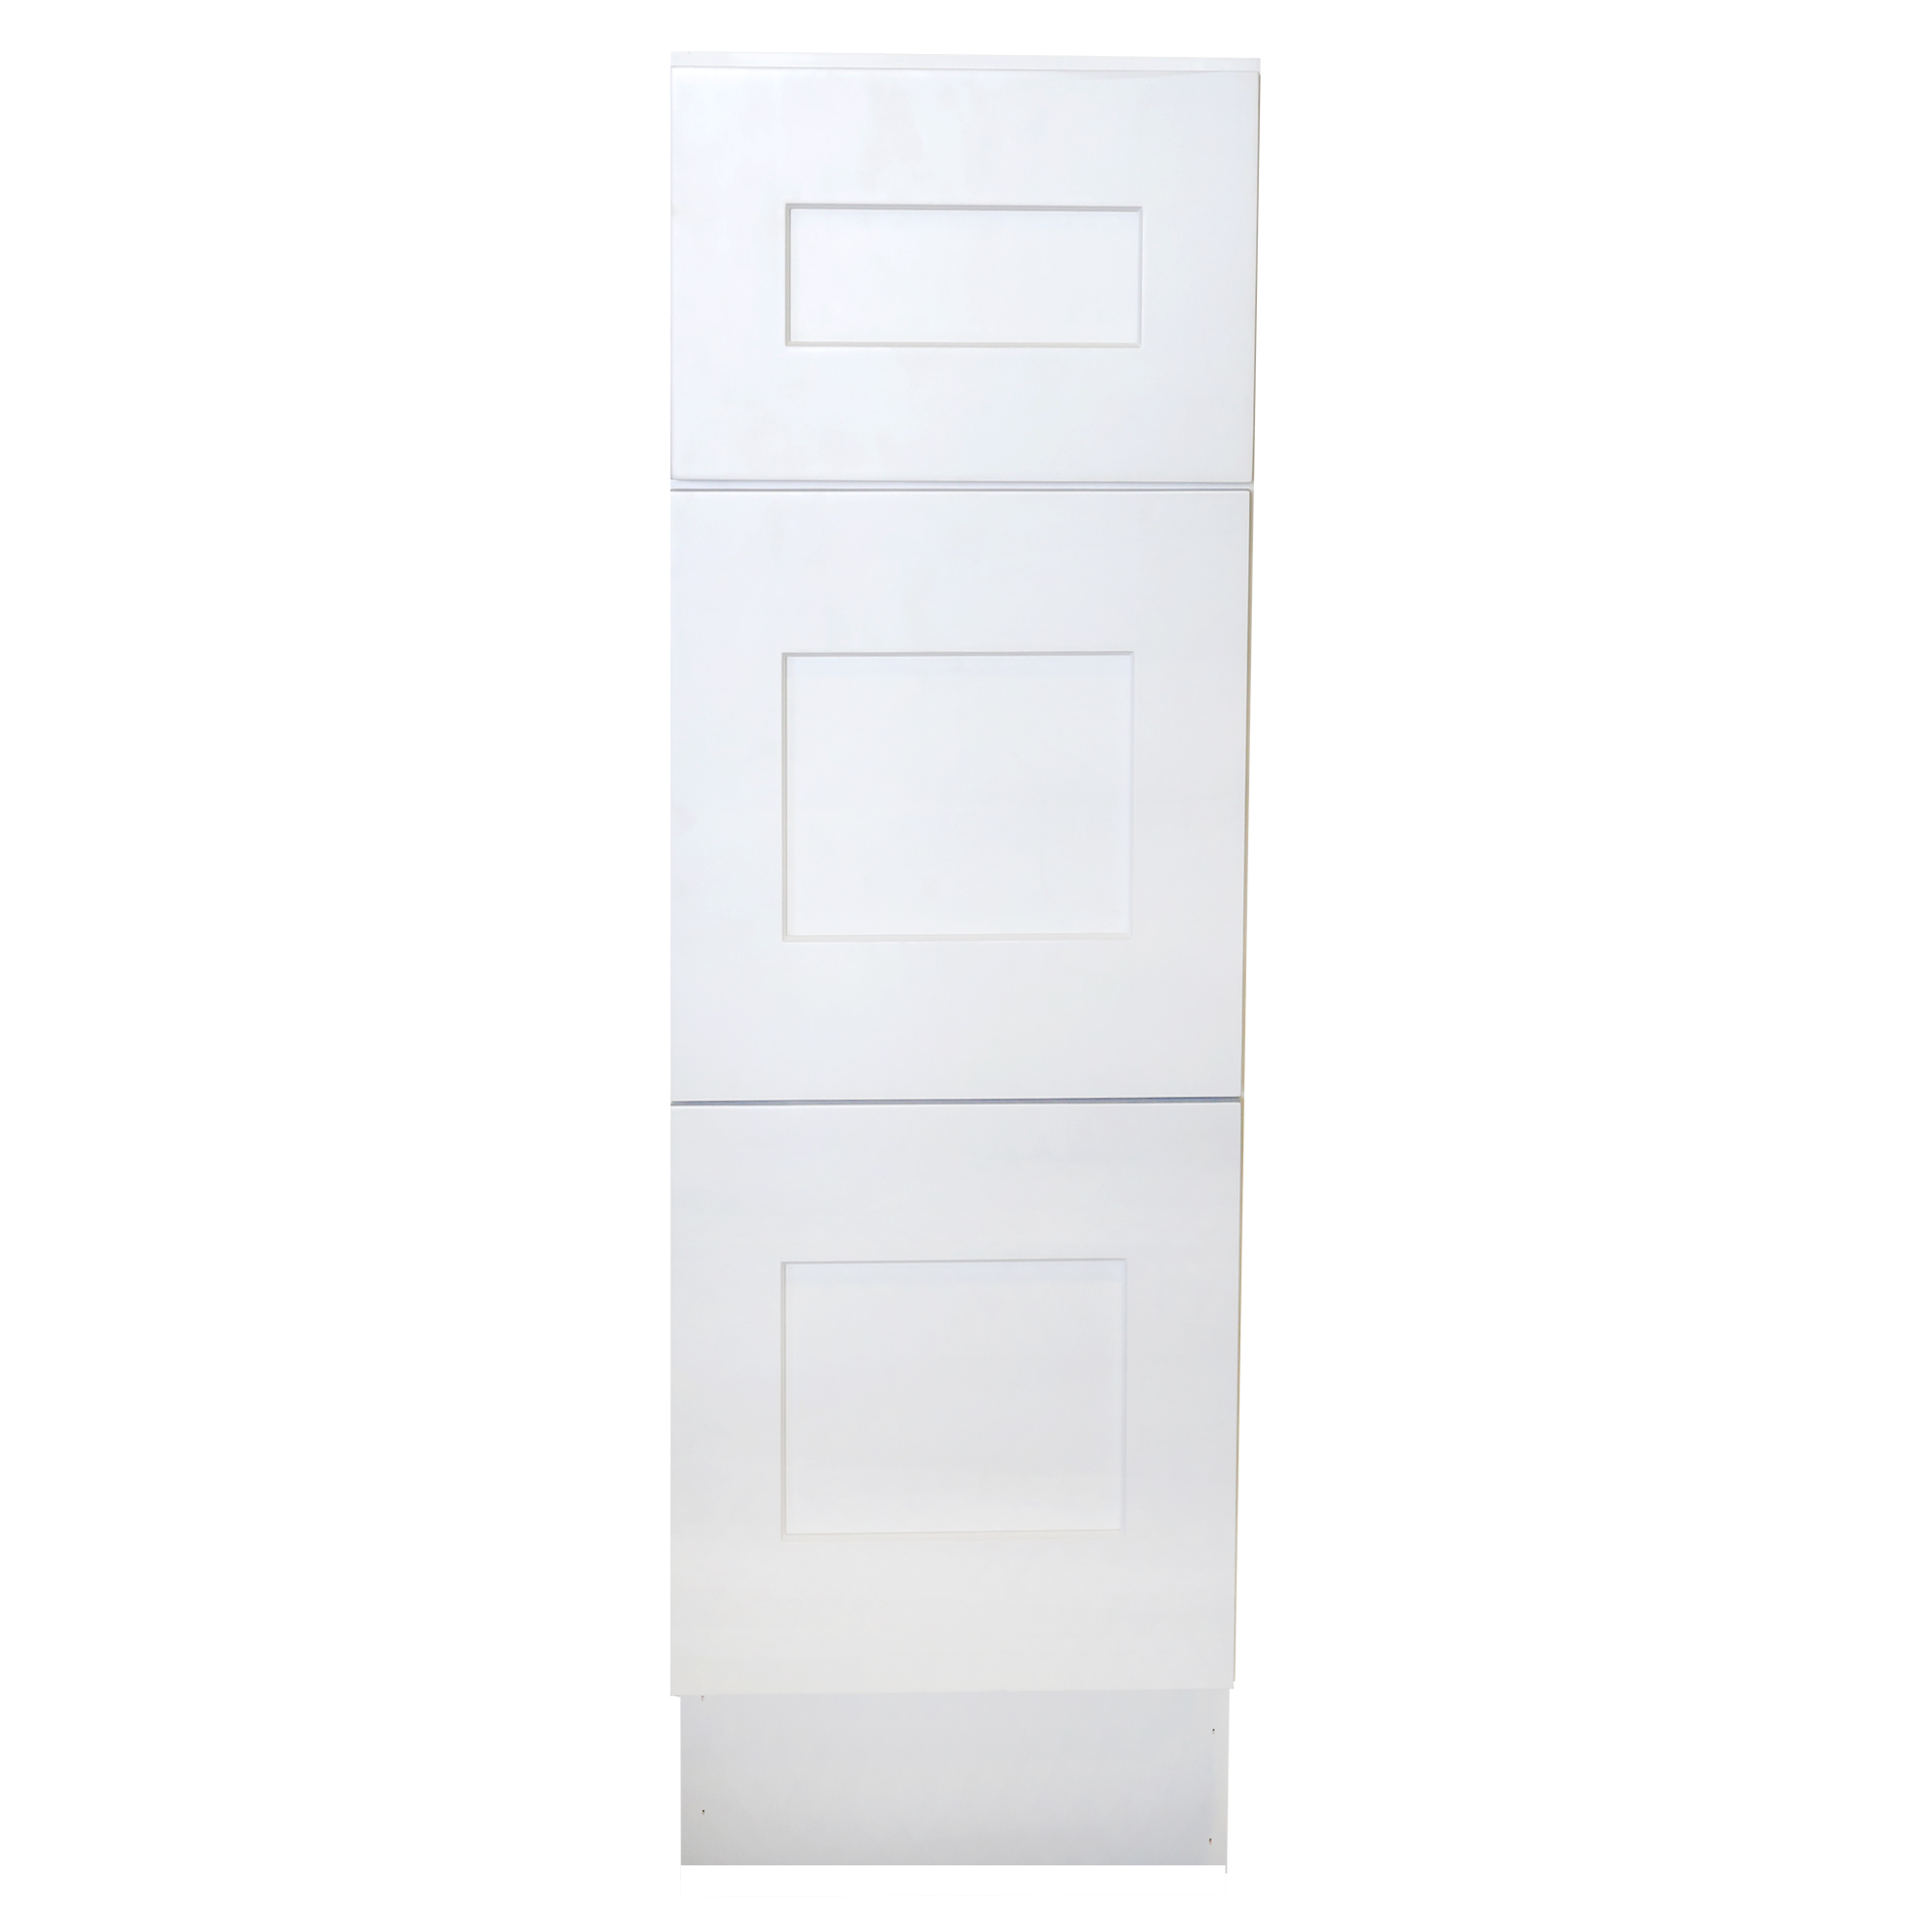 Ready to Assemble 21Wx34.5Hx21D in. Shaker VANITY DRAWER BASE-3 DRAWERS in White